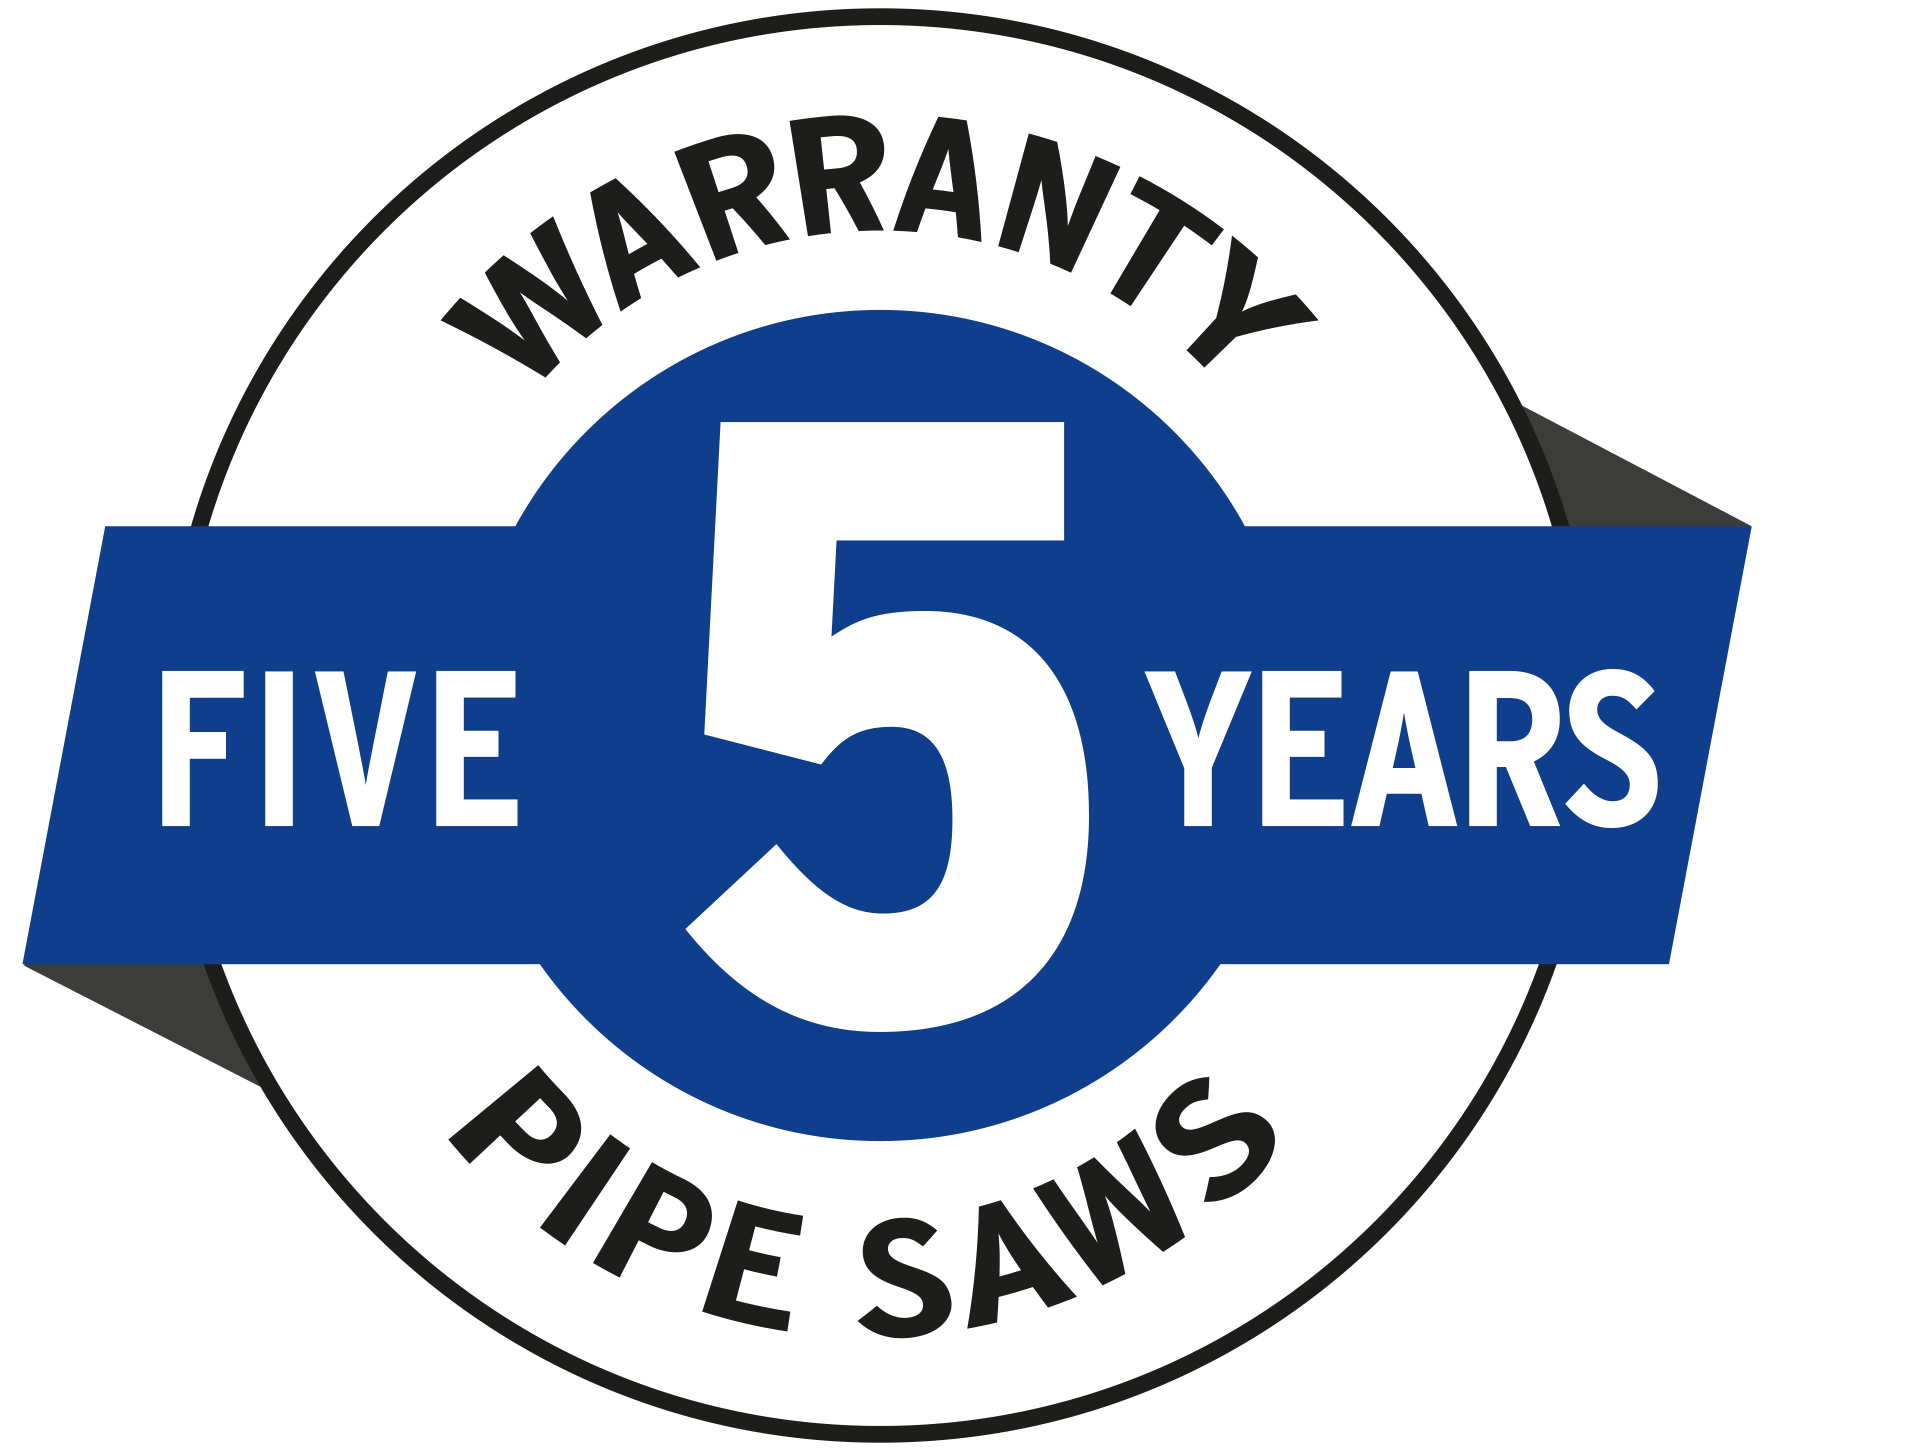 5 Years Warranty on our Pipe Saws